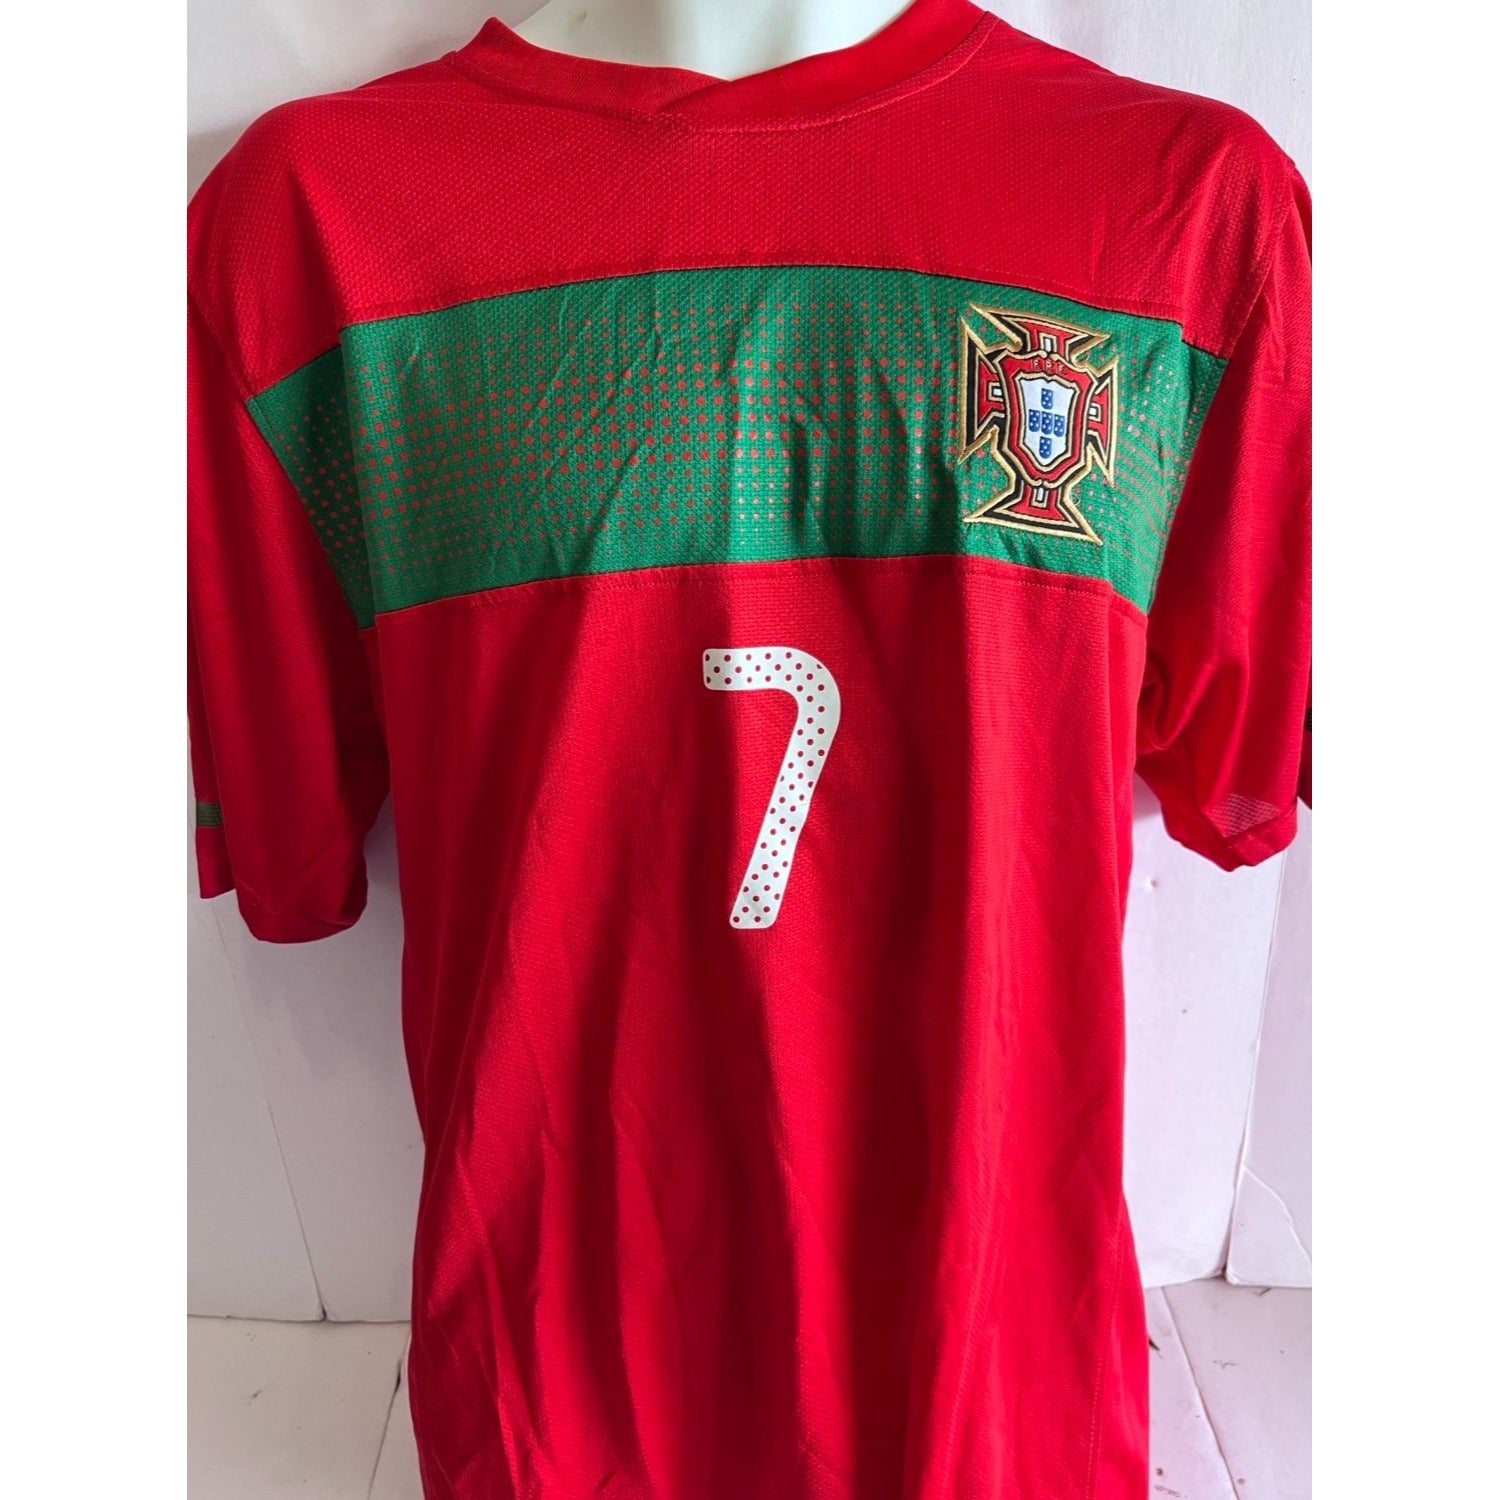 Cristiano Ronaldo Portugal size extra large jersey signed with proof